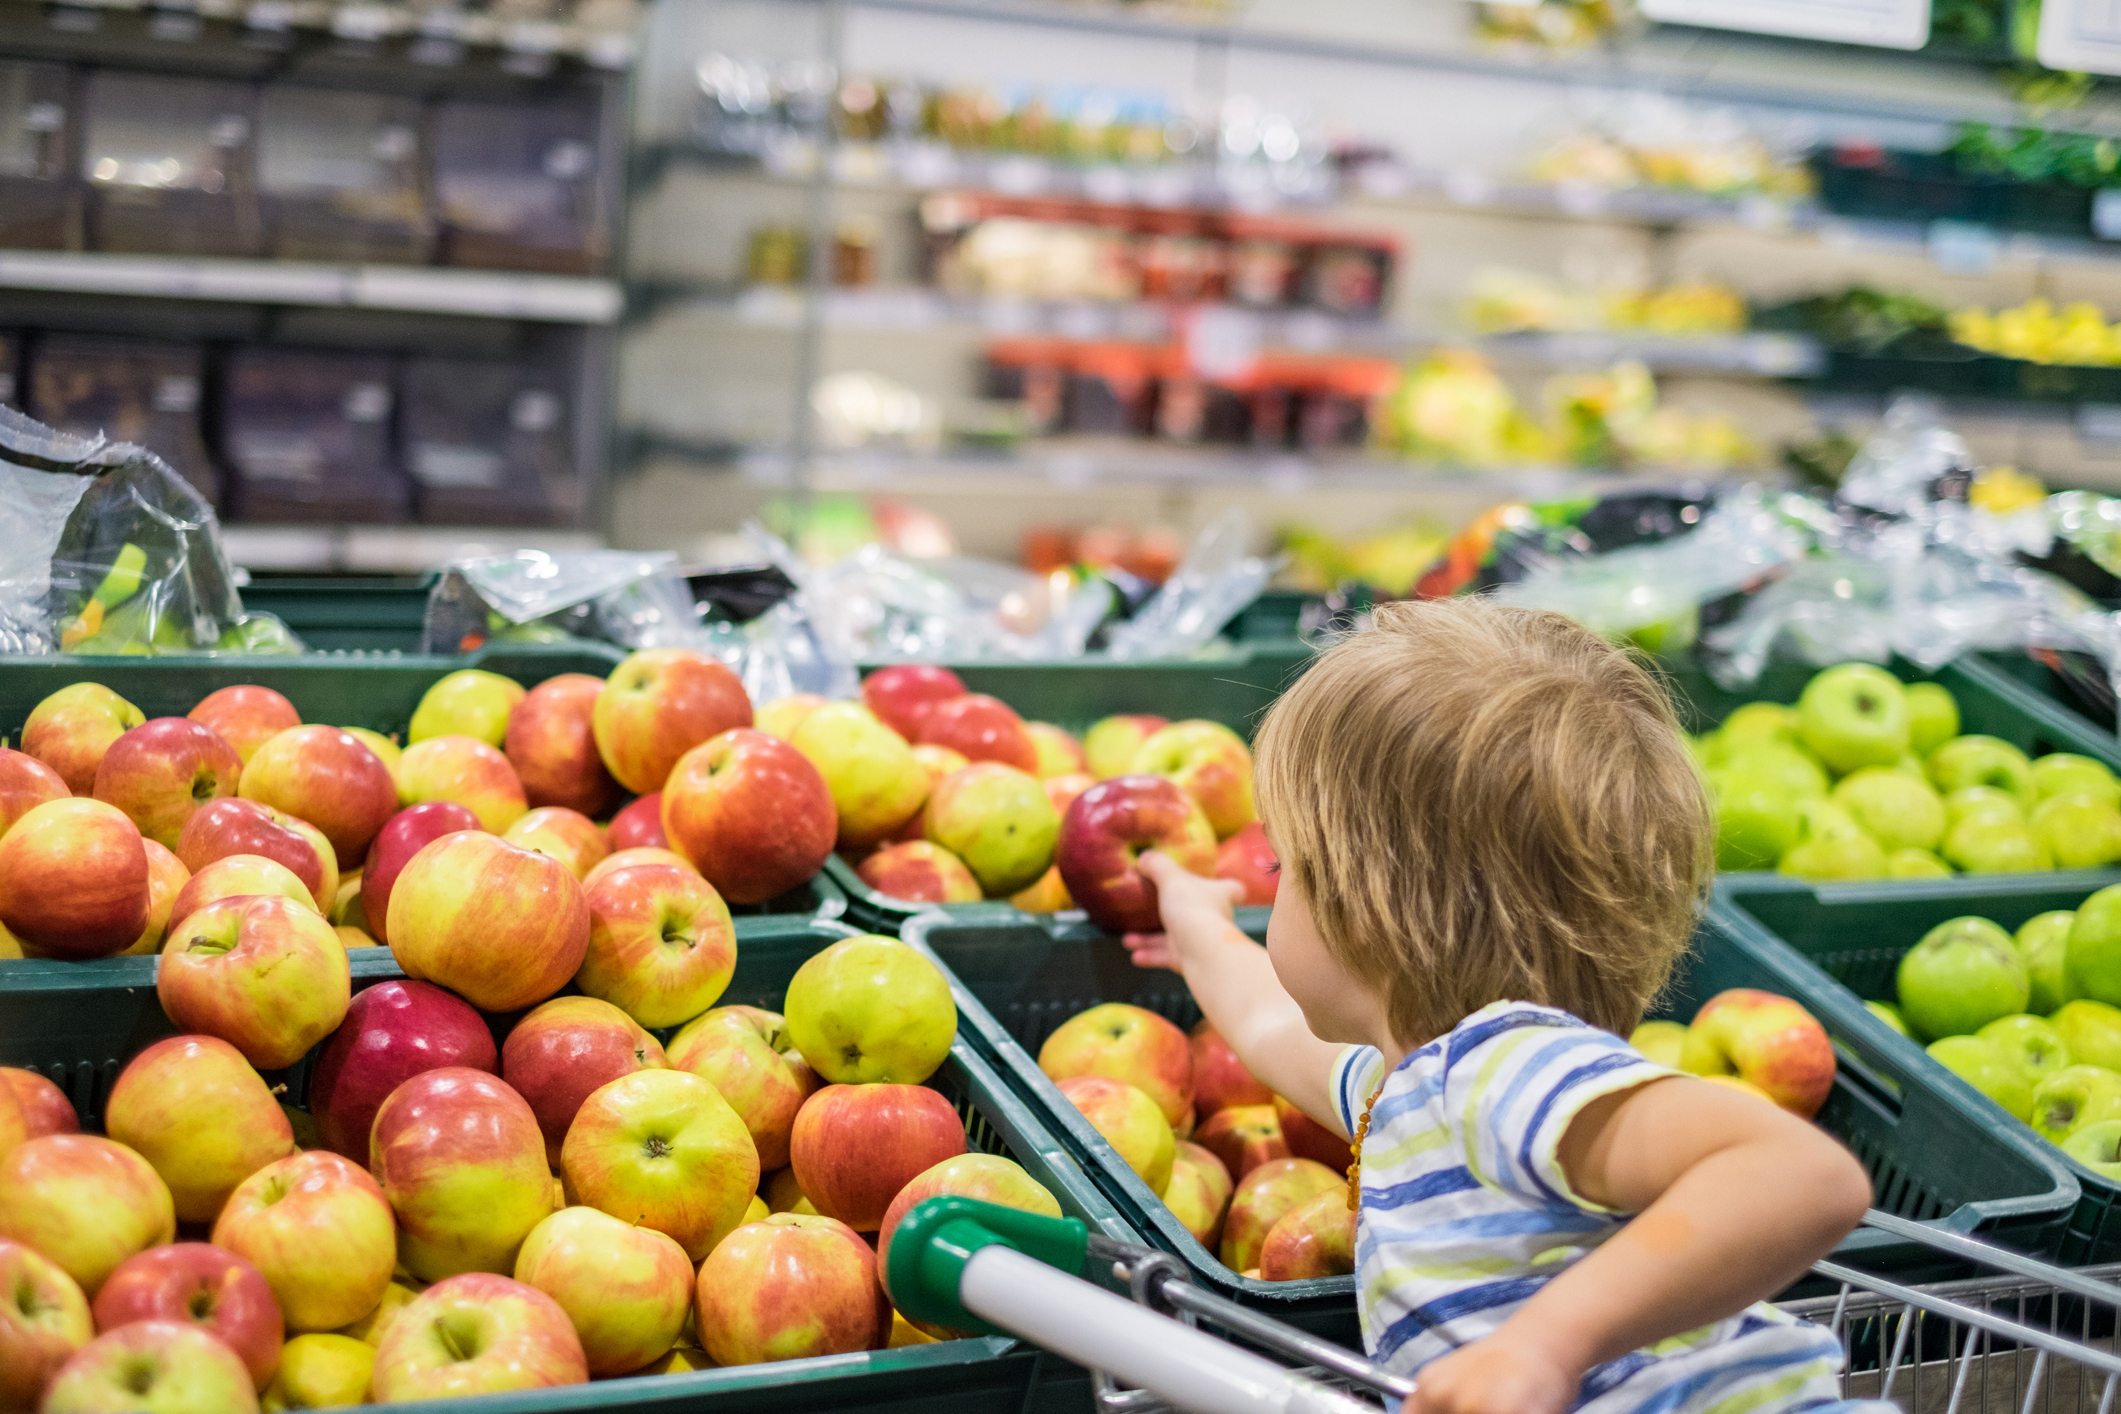 A young child with light skin tone leans over from his seat in a grocery cart to pick an apple.